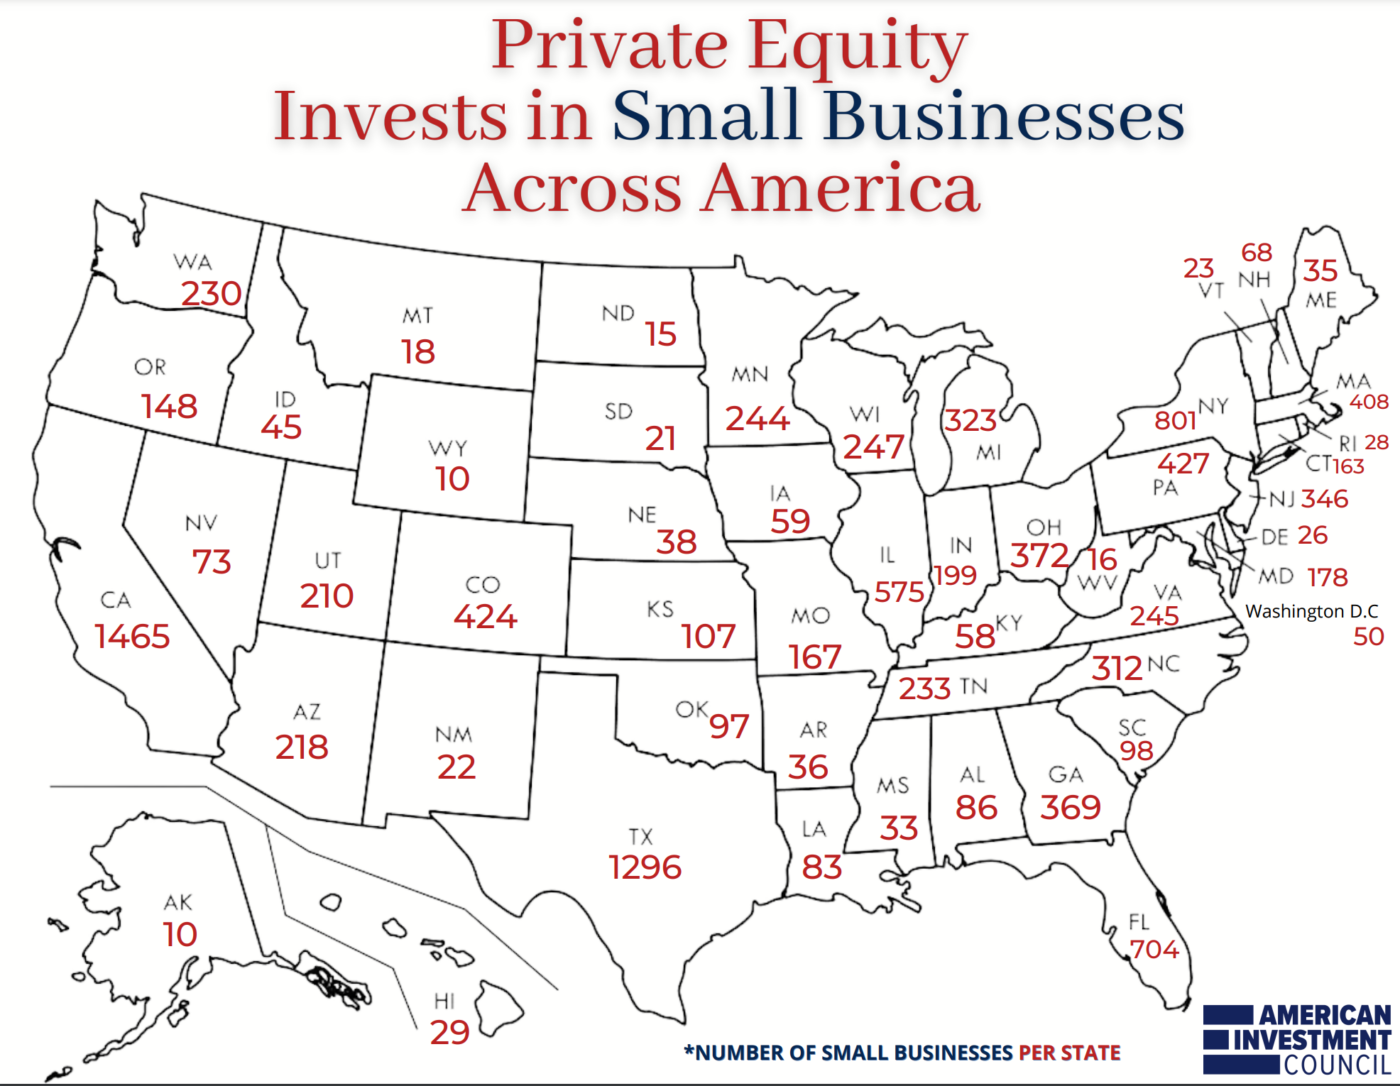 American Investment Council Releases New Video Highlighting Private